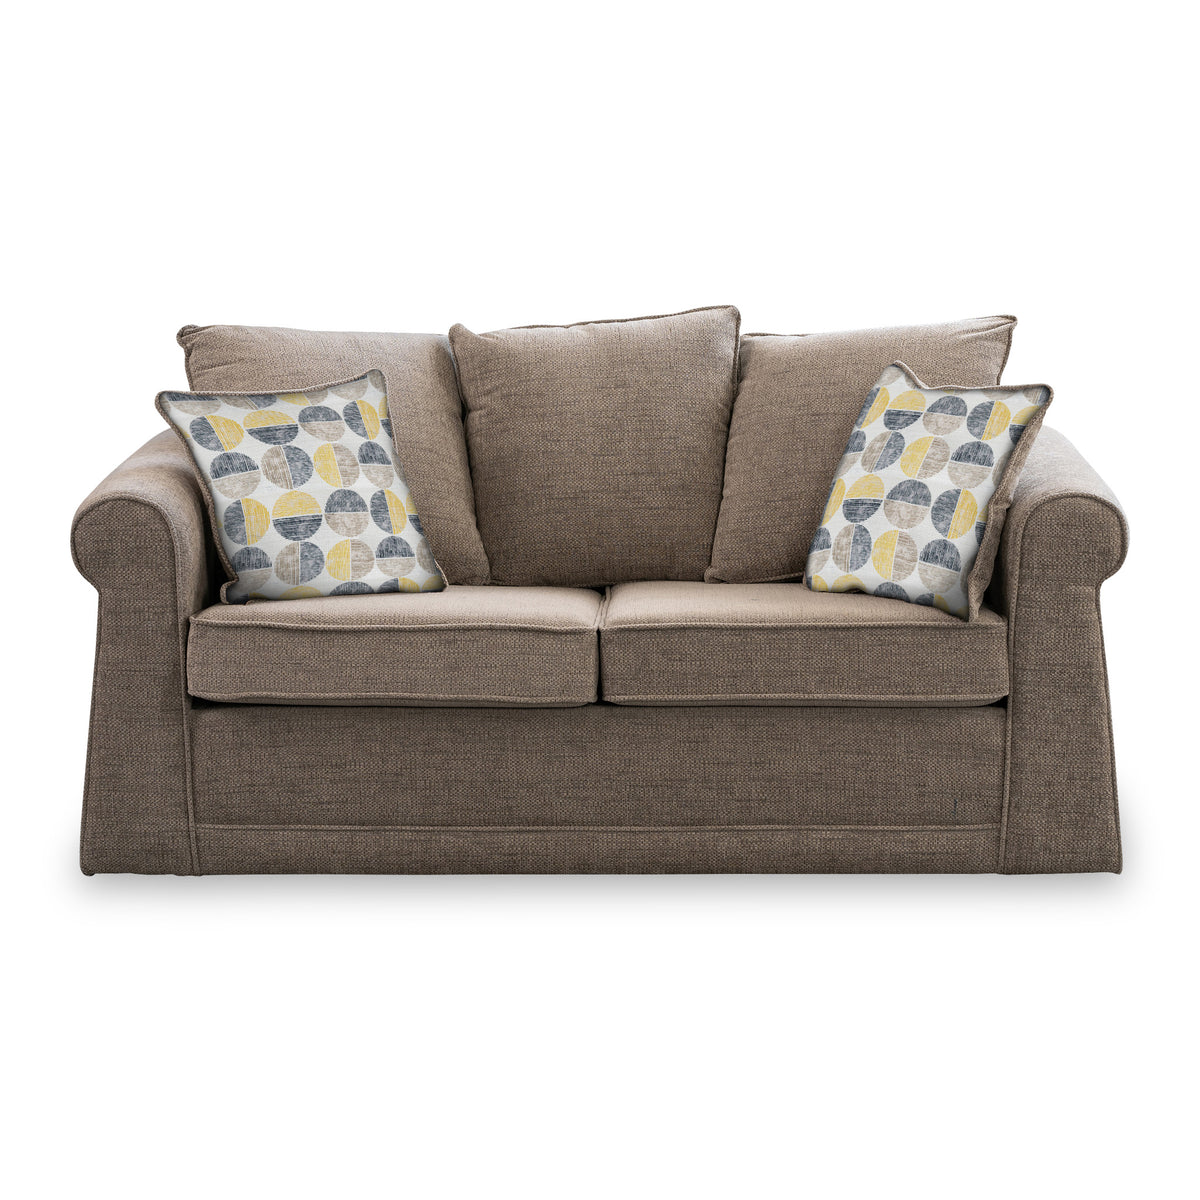 Branston Fawn Soft Weave 2 Seater Sofabed with Beige Scatter Cushions from Roseland Furniture